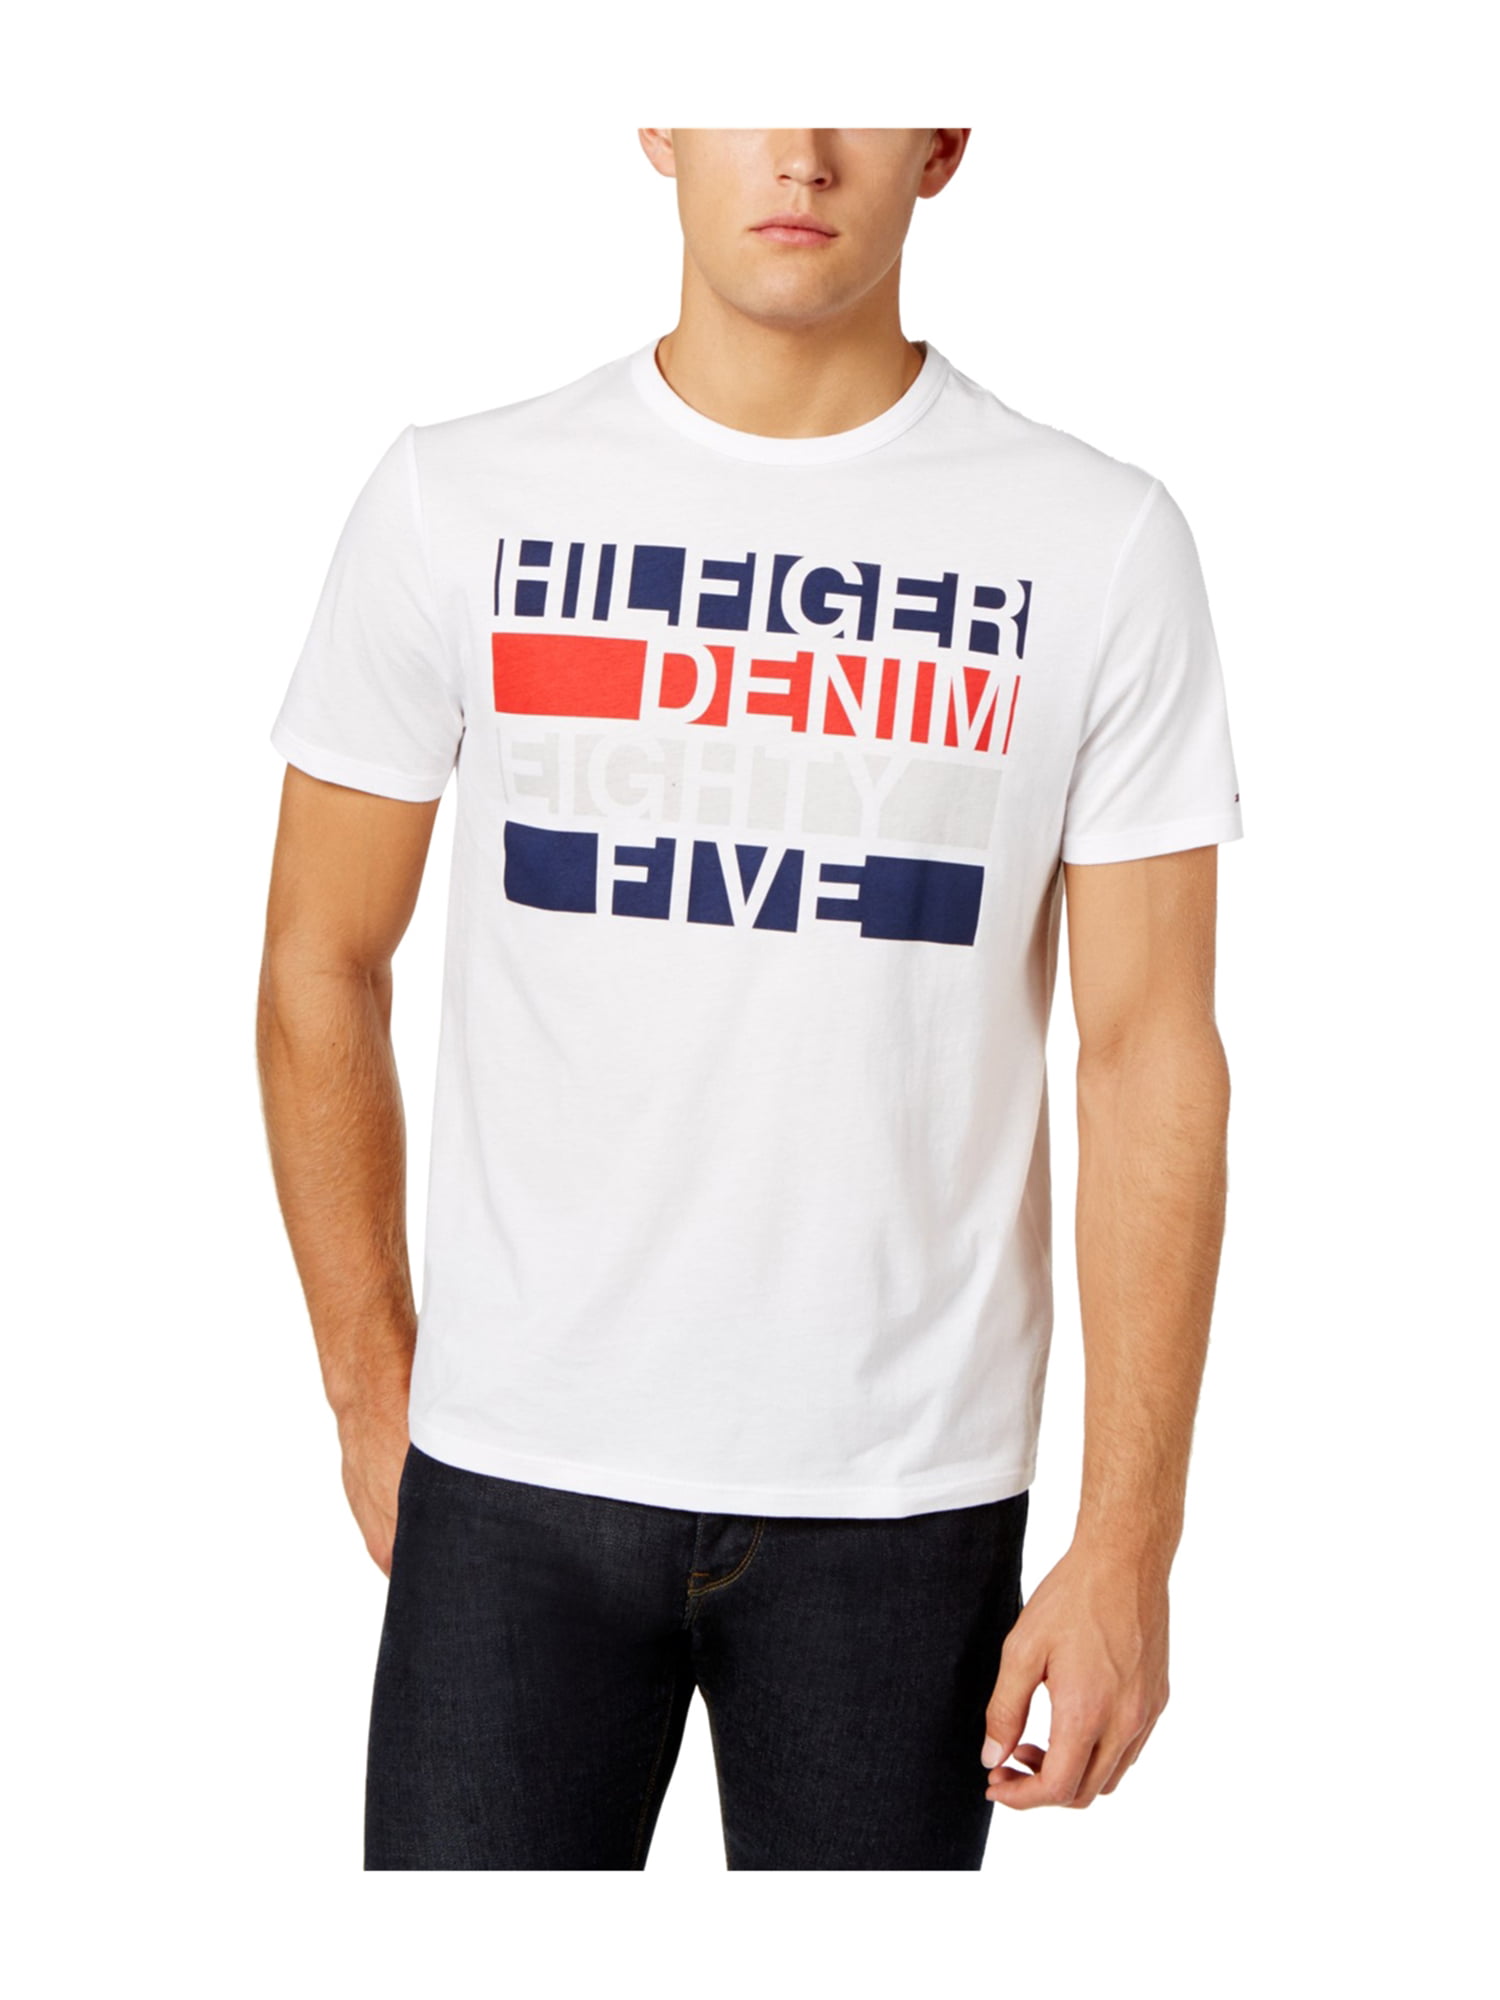 Tommy Hilfiger - Tommy Hilfiger Mens Eighty Five Graphic T-Shirt ...